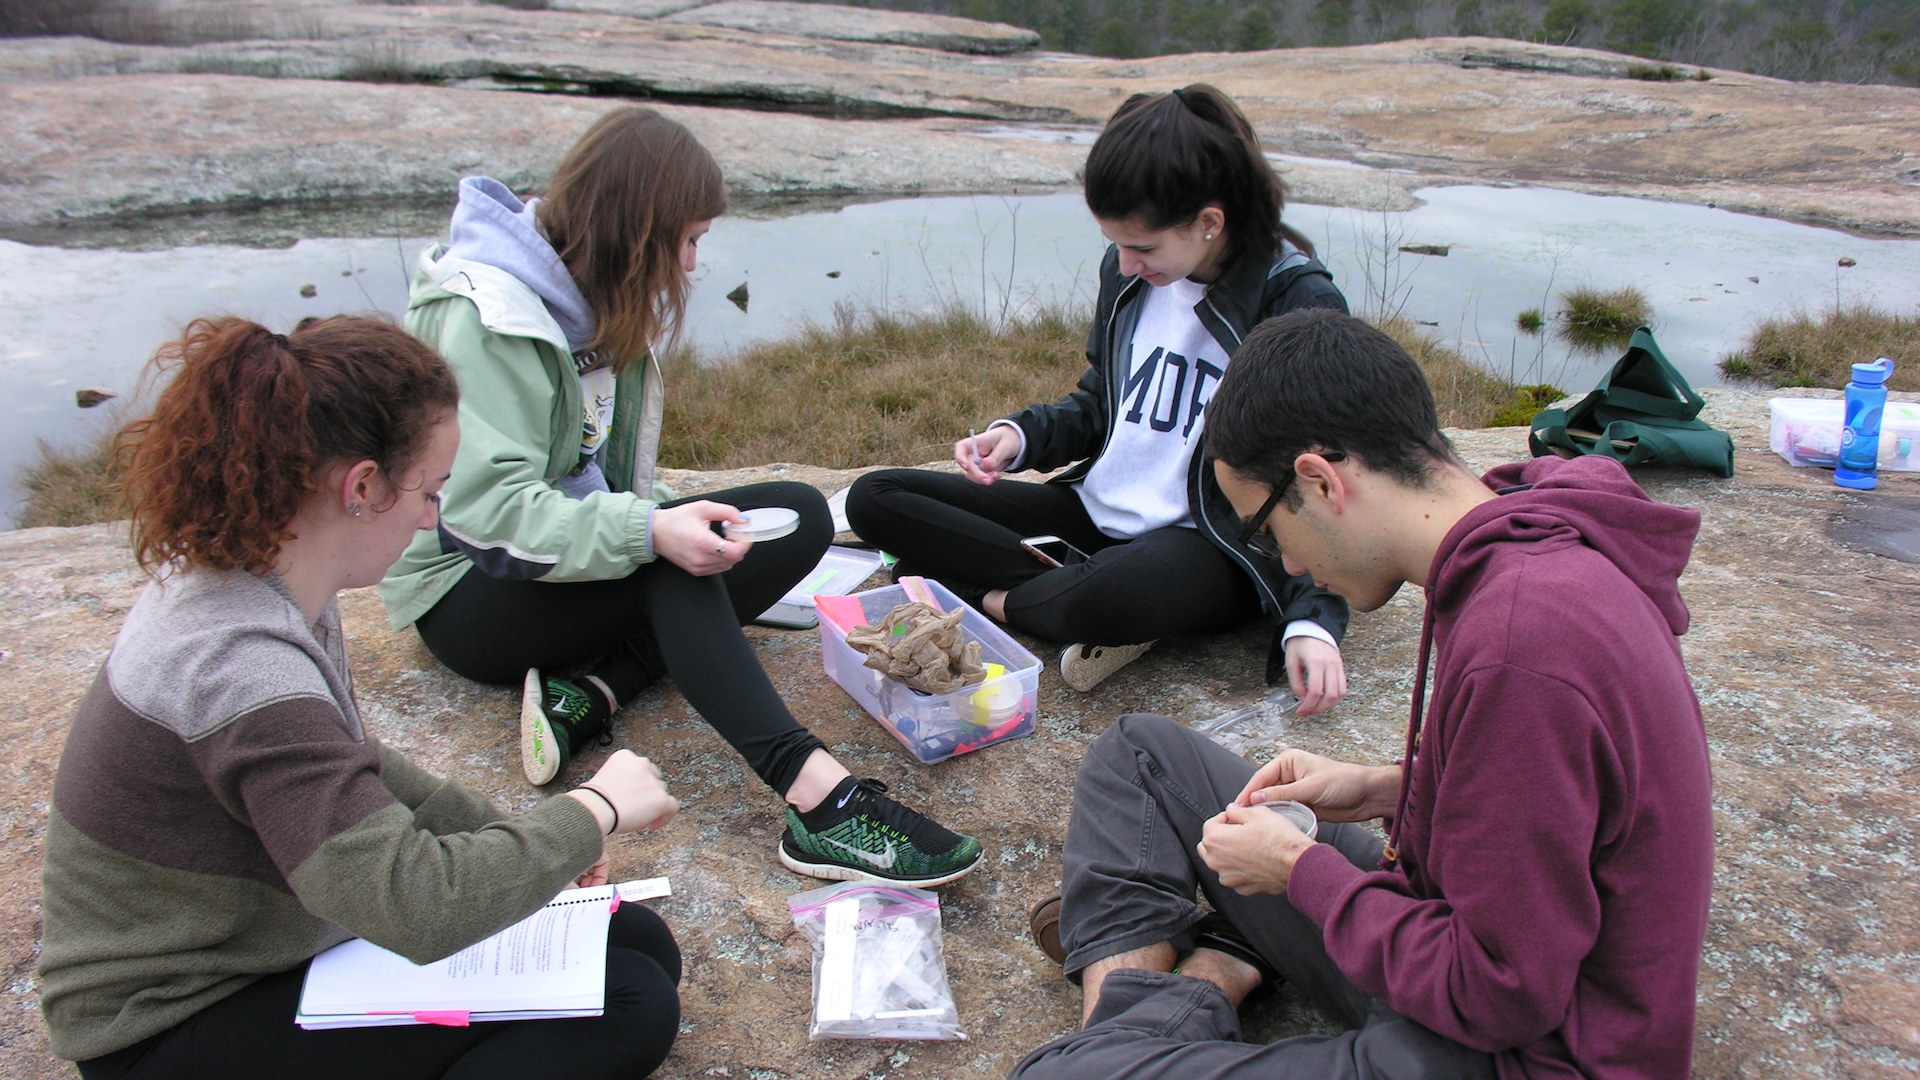 Students collecting samples on Arabia Mountain